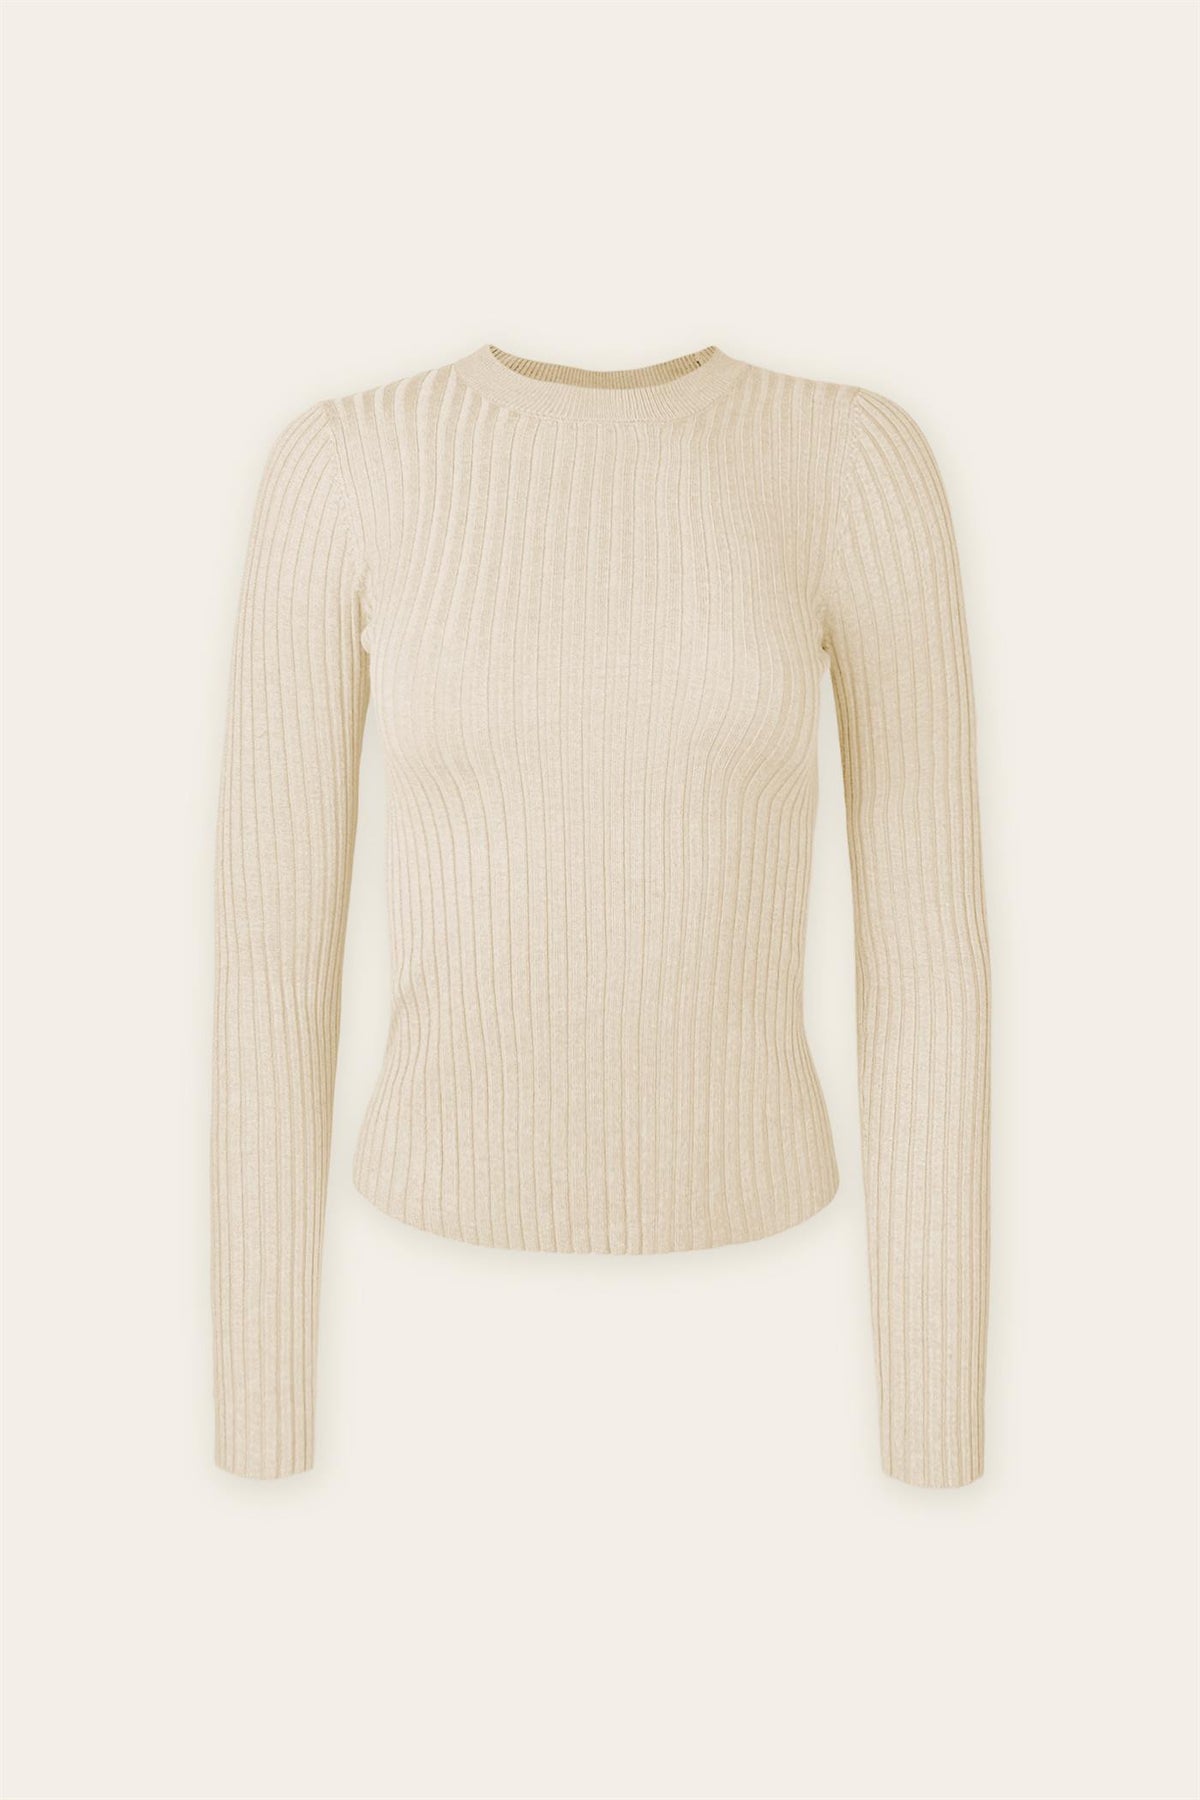 Dress Forum | Ivory Ribbed Knit Top | Sweetest Stitch Online Shop